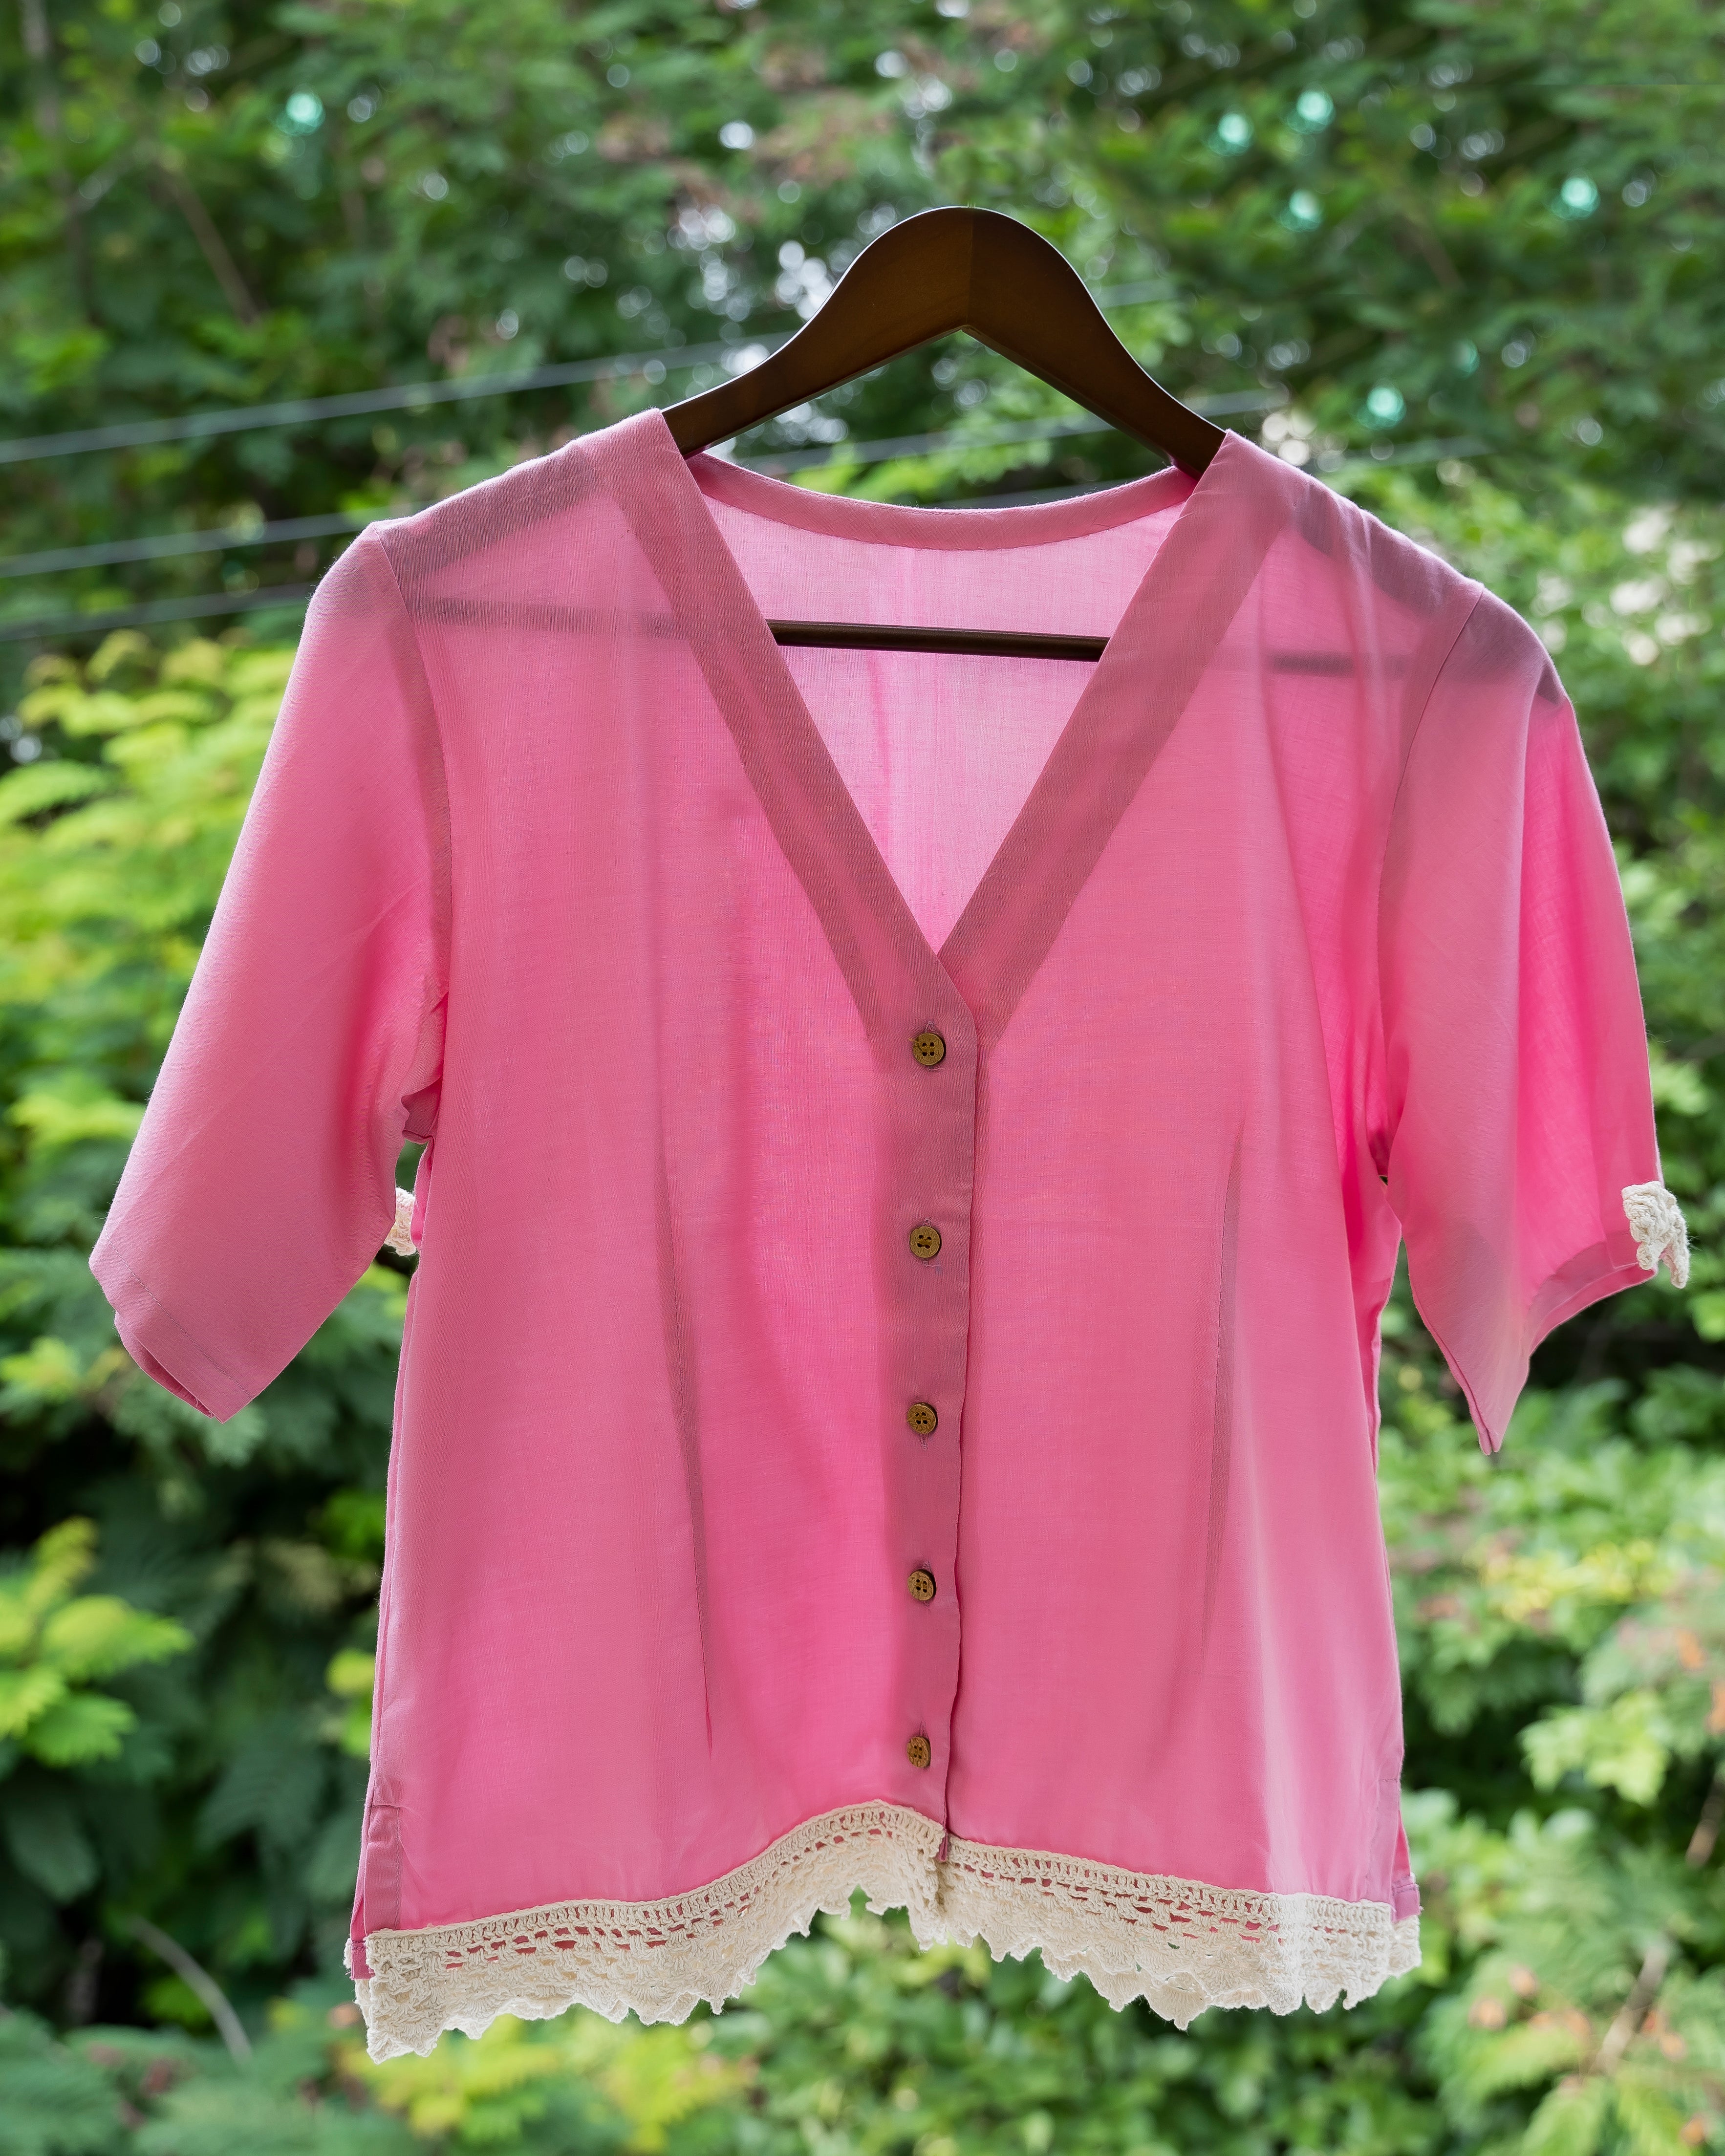 ColorPlay | Cotton Modal Blouse with Handmade Crochet Trim & Sleeves - Candy Pink